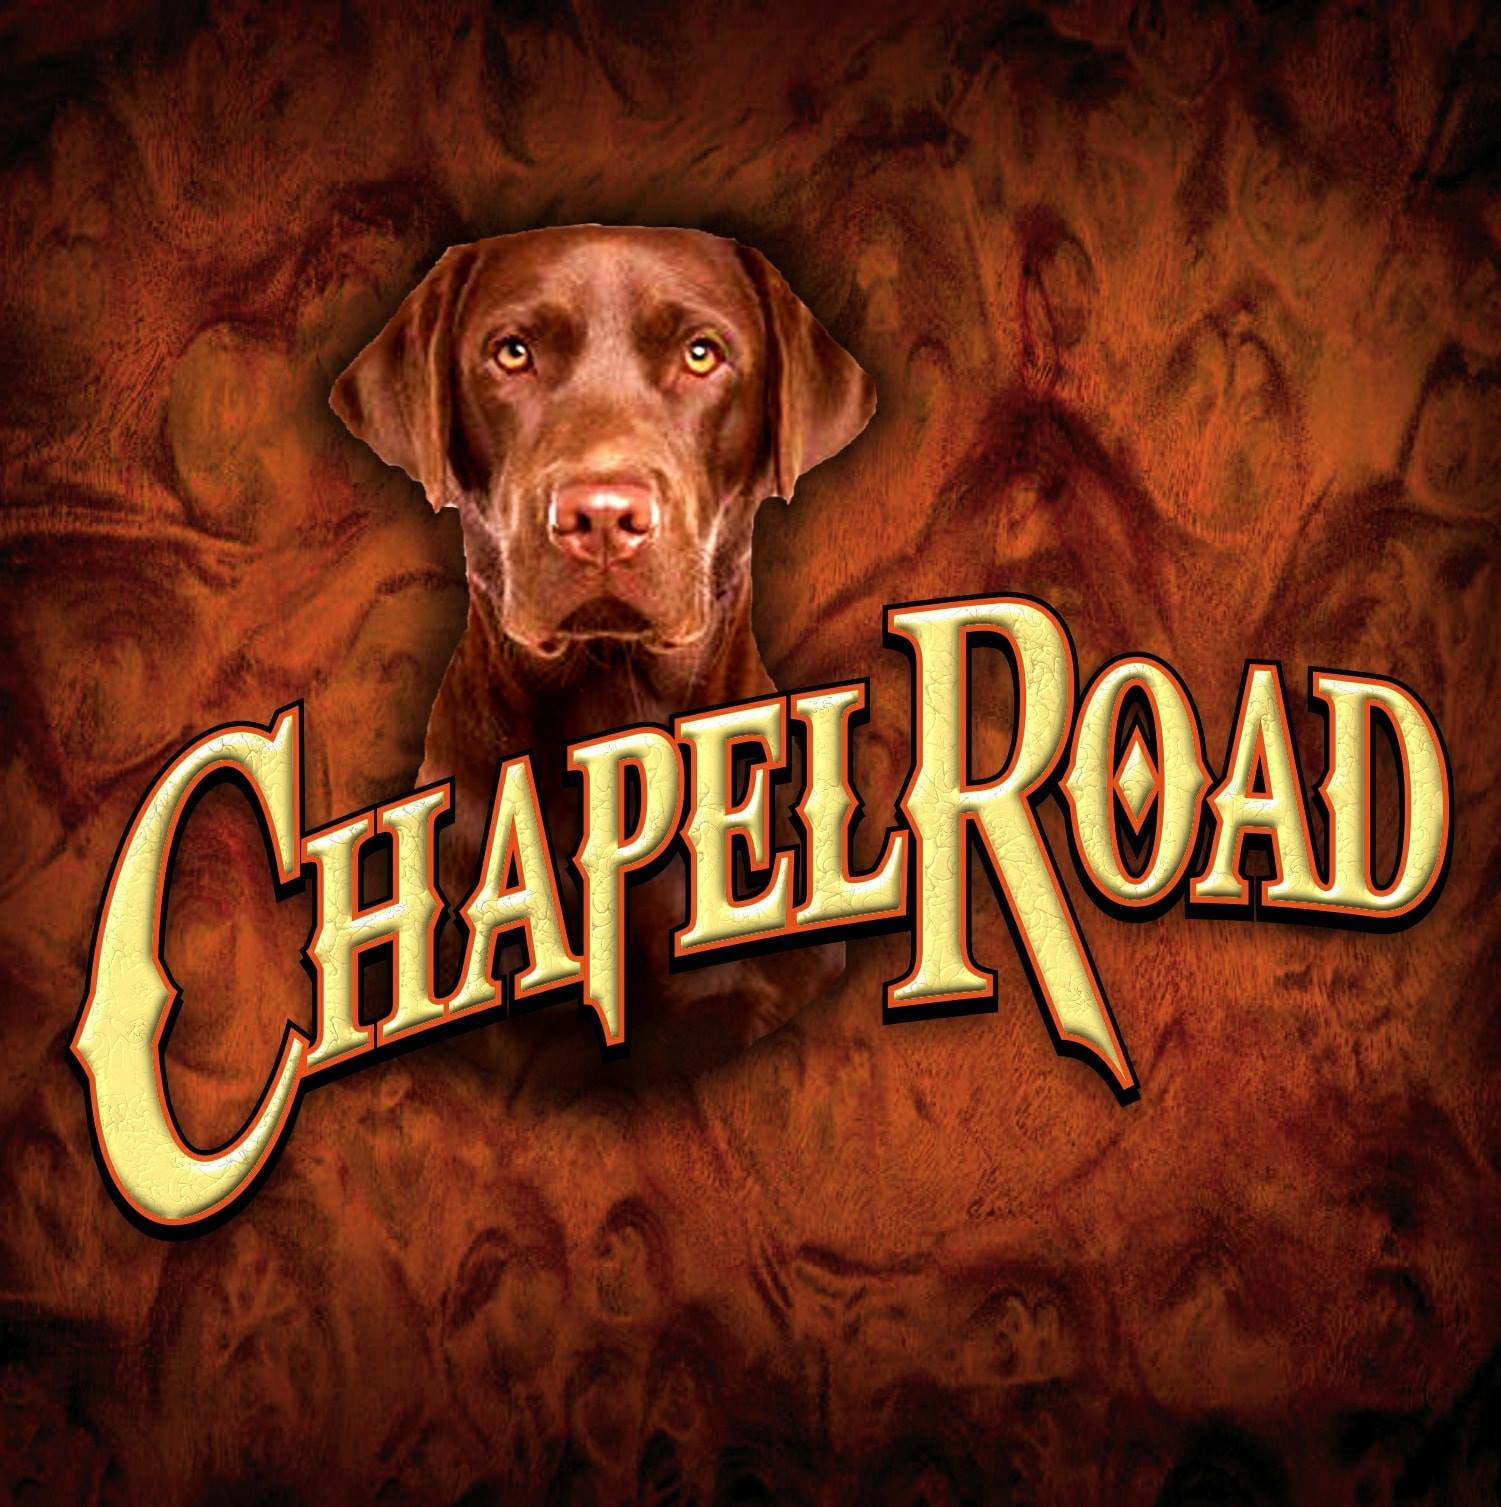 chapel road printed on brown background with chocolate lab